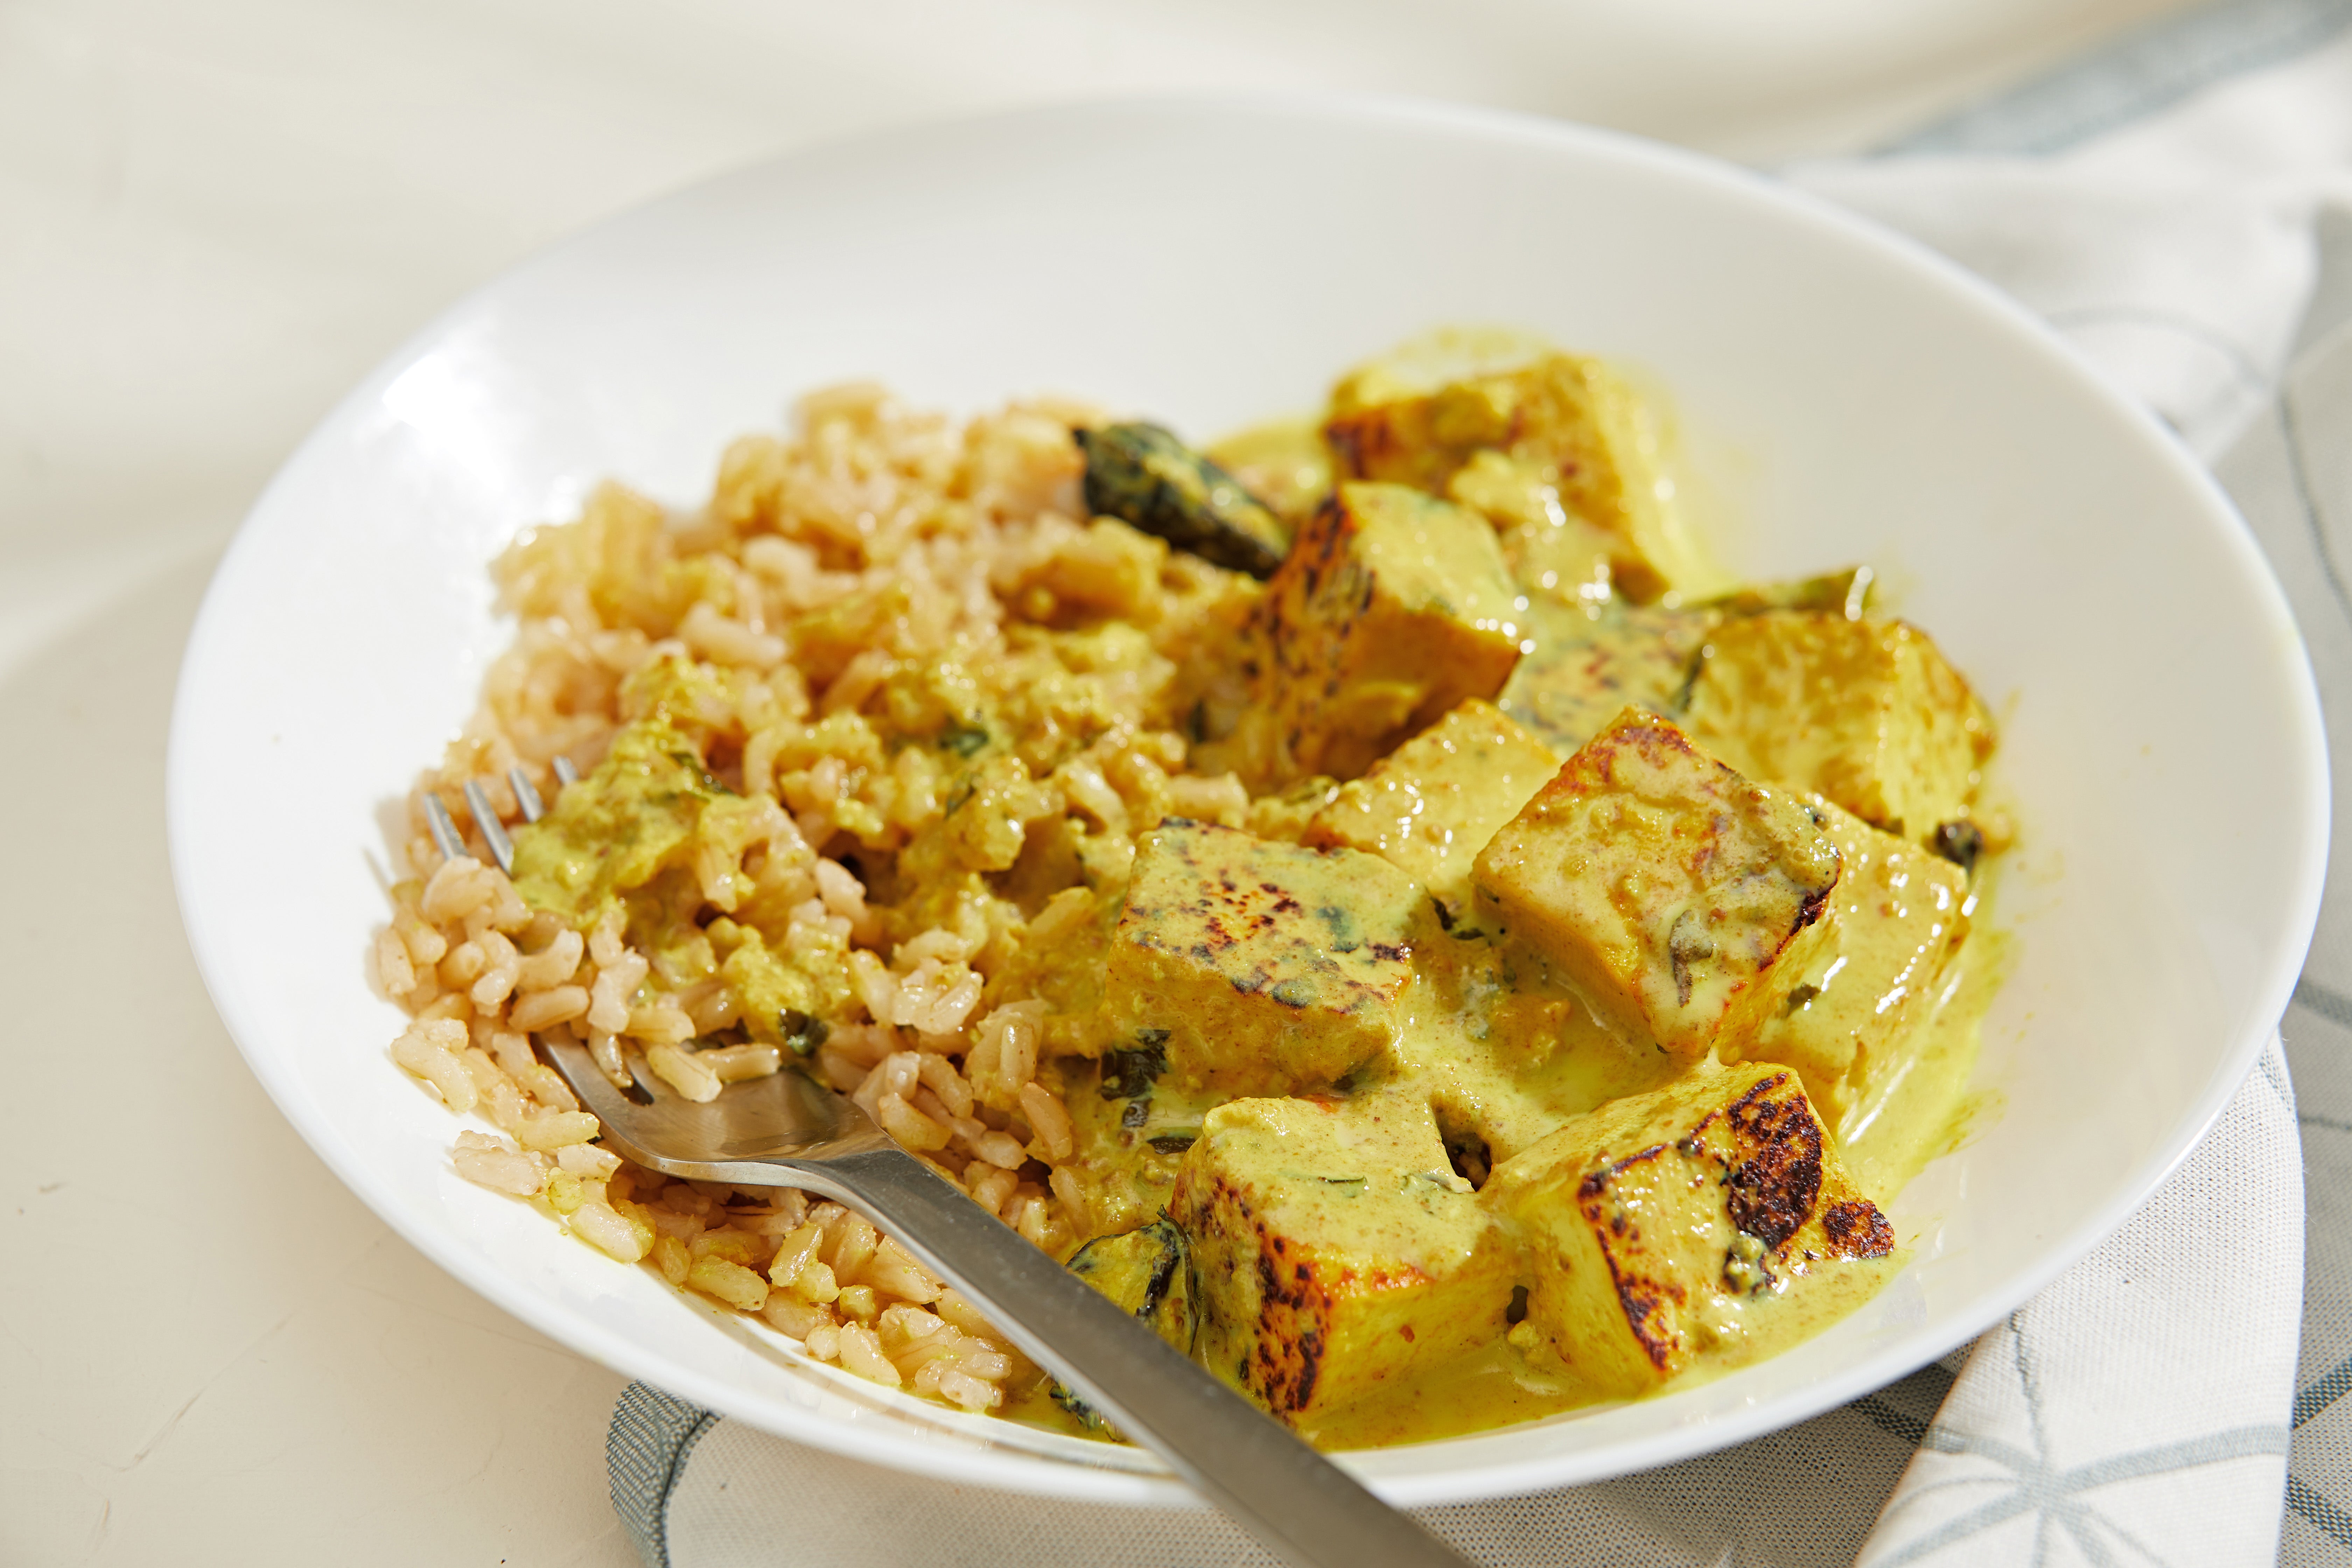 This paneer dish takes barely 20 minutes to come together